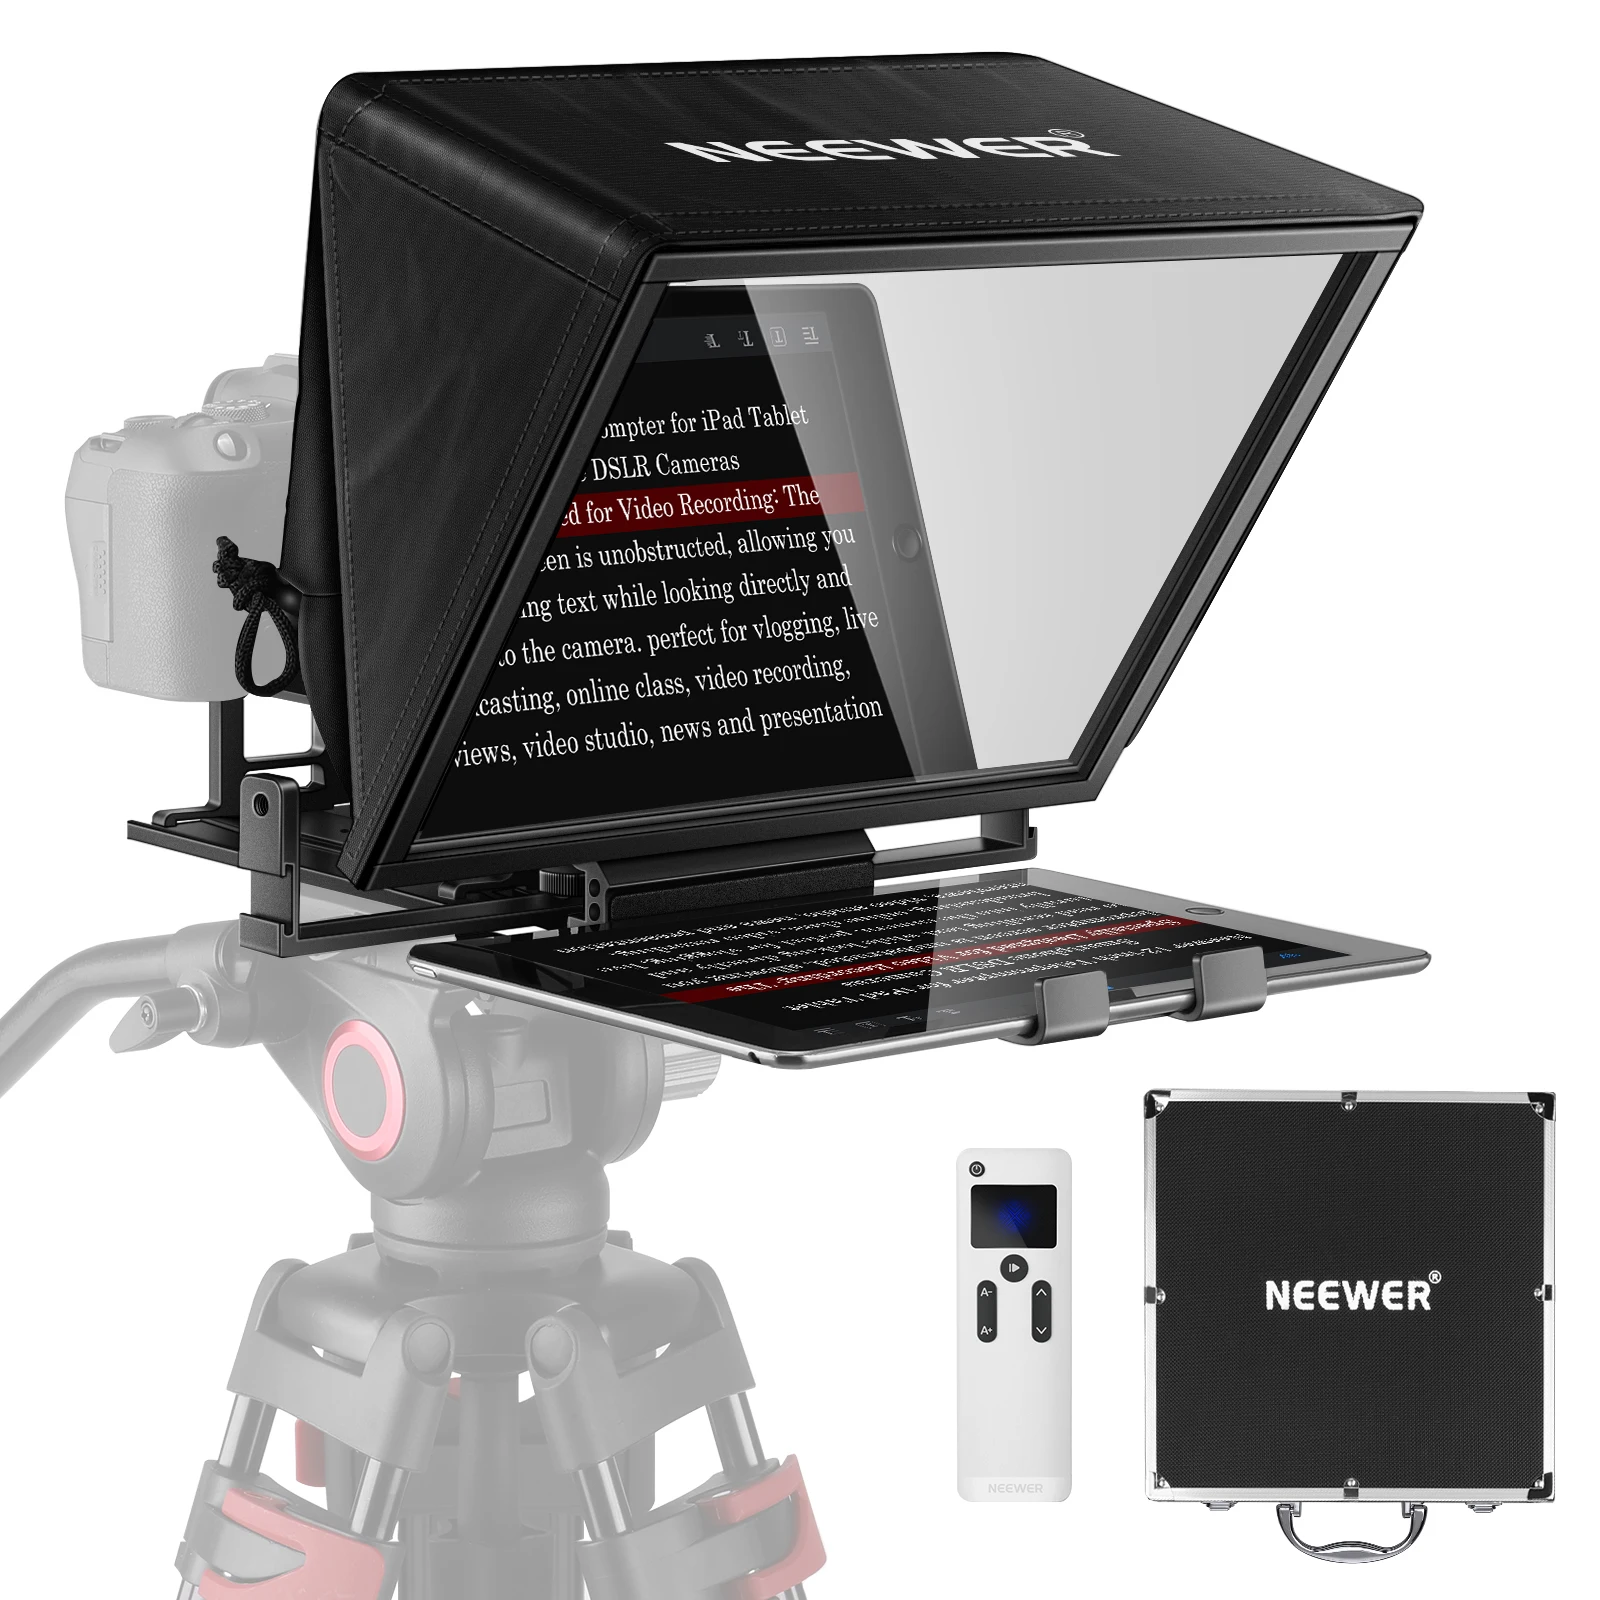 

NEEWER Teleprompter, X14 Portable Teleprompter With RT-110 Remote (Bluetooth Connection Inside NEEWER Teleprompter App)